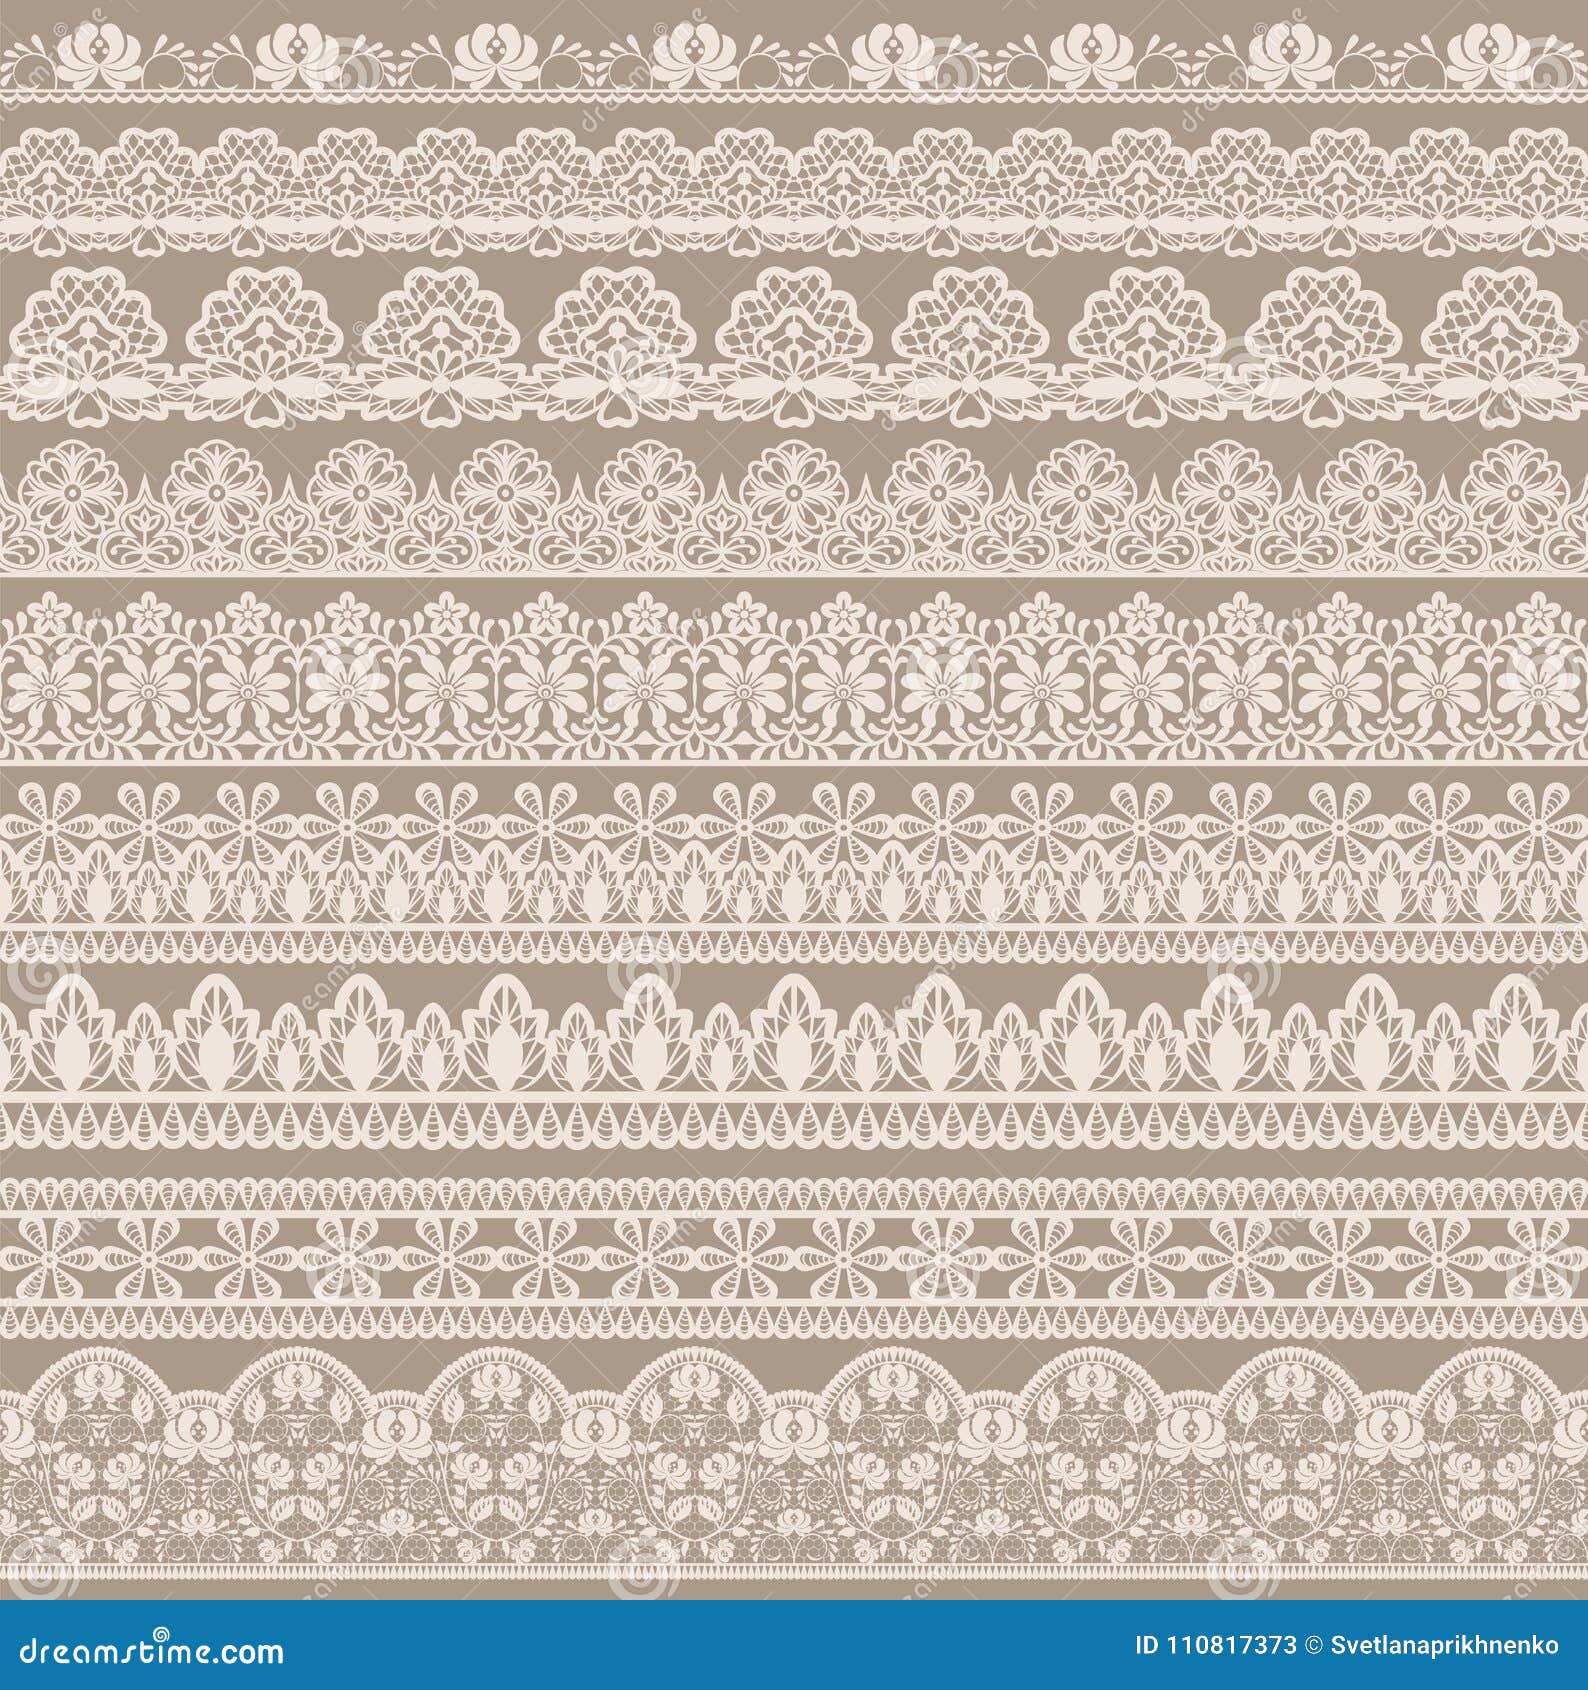 Horizontally seamless beige lace background with lace borders